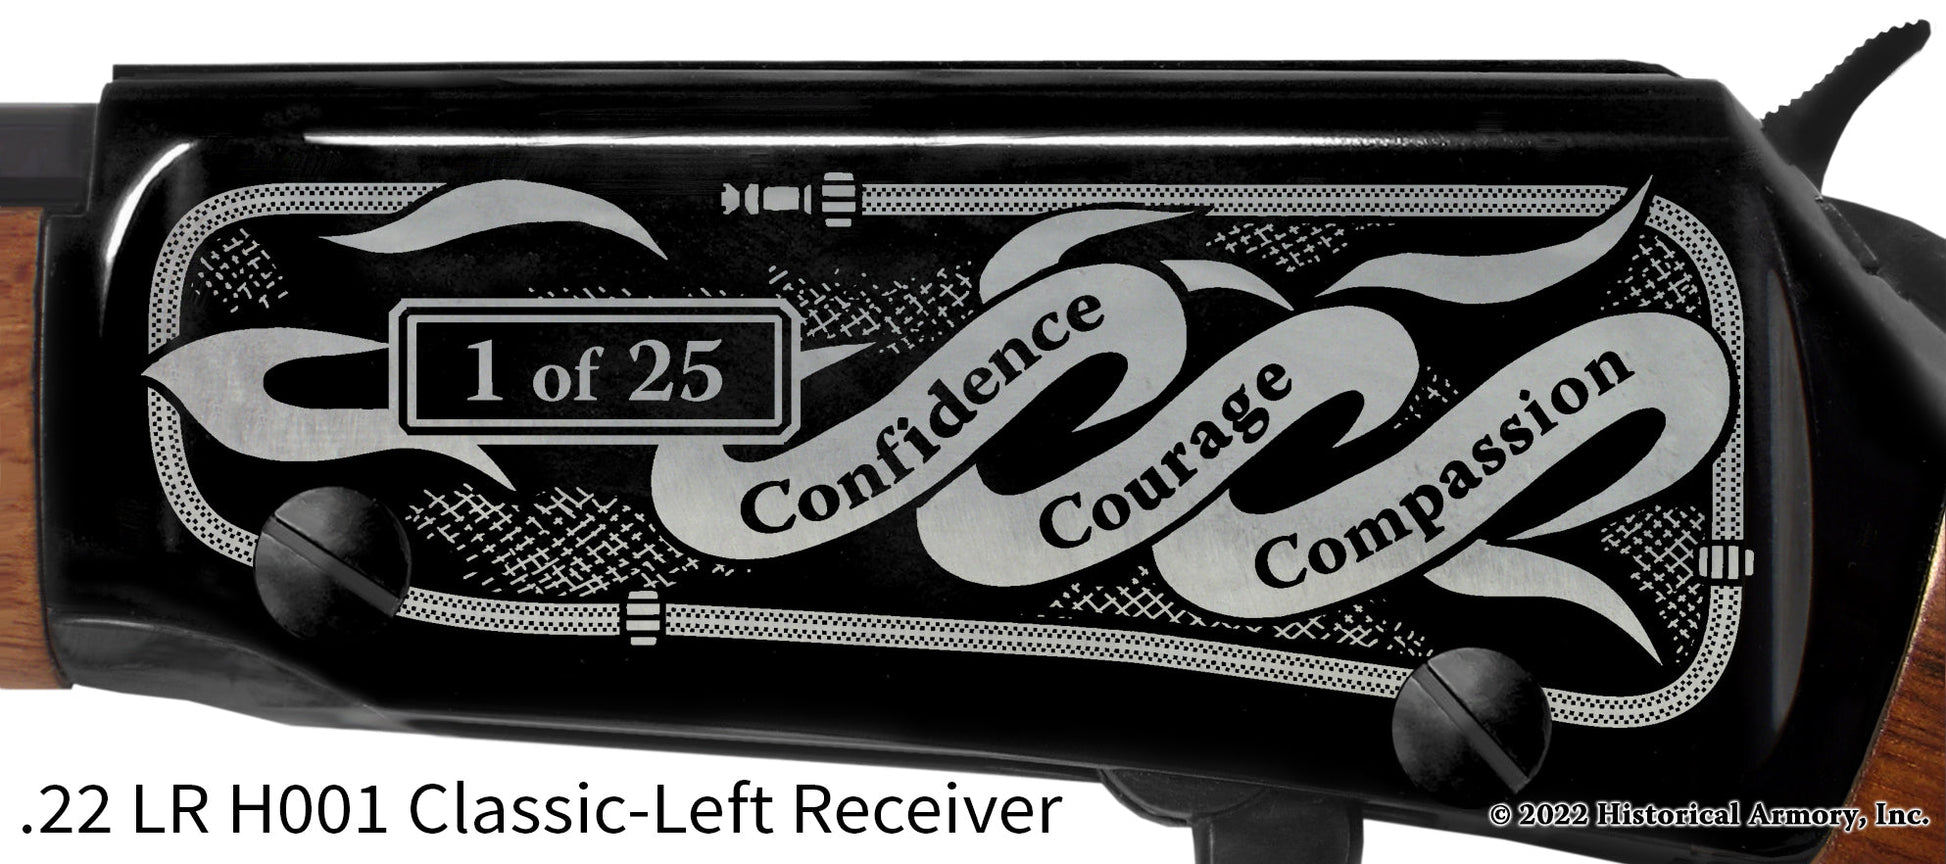 Fire Chief with confidence, courage and compassion Engraved Rifle Limited Edition